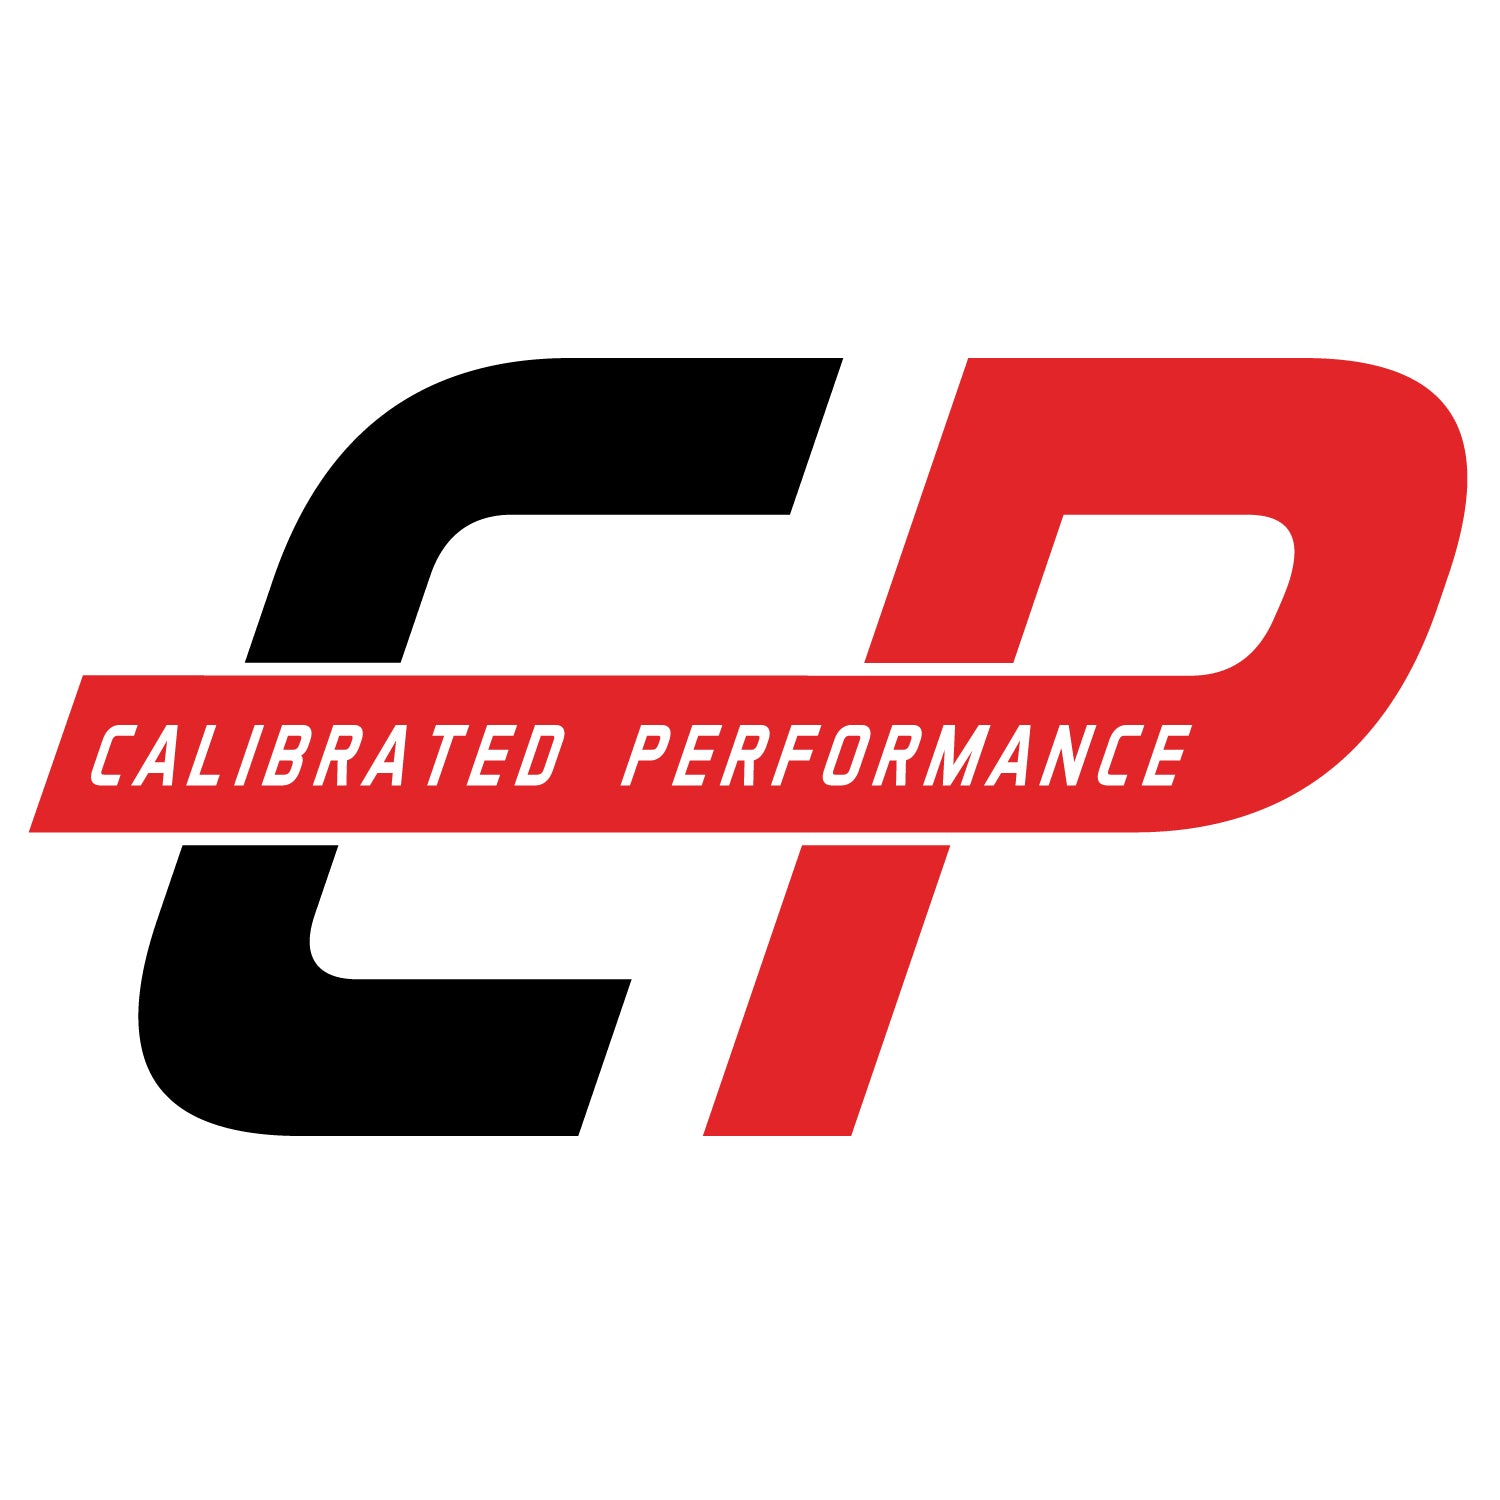 Calibrated Performance